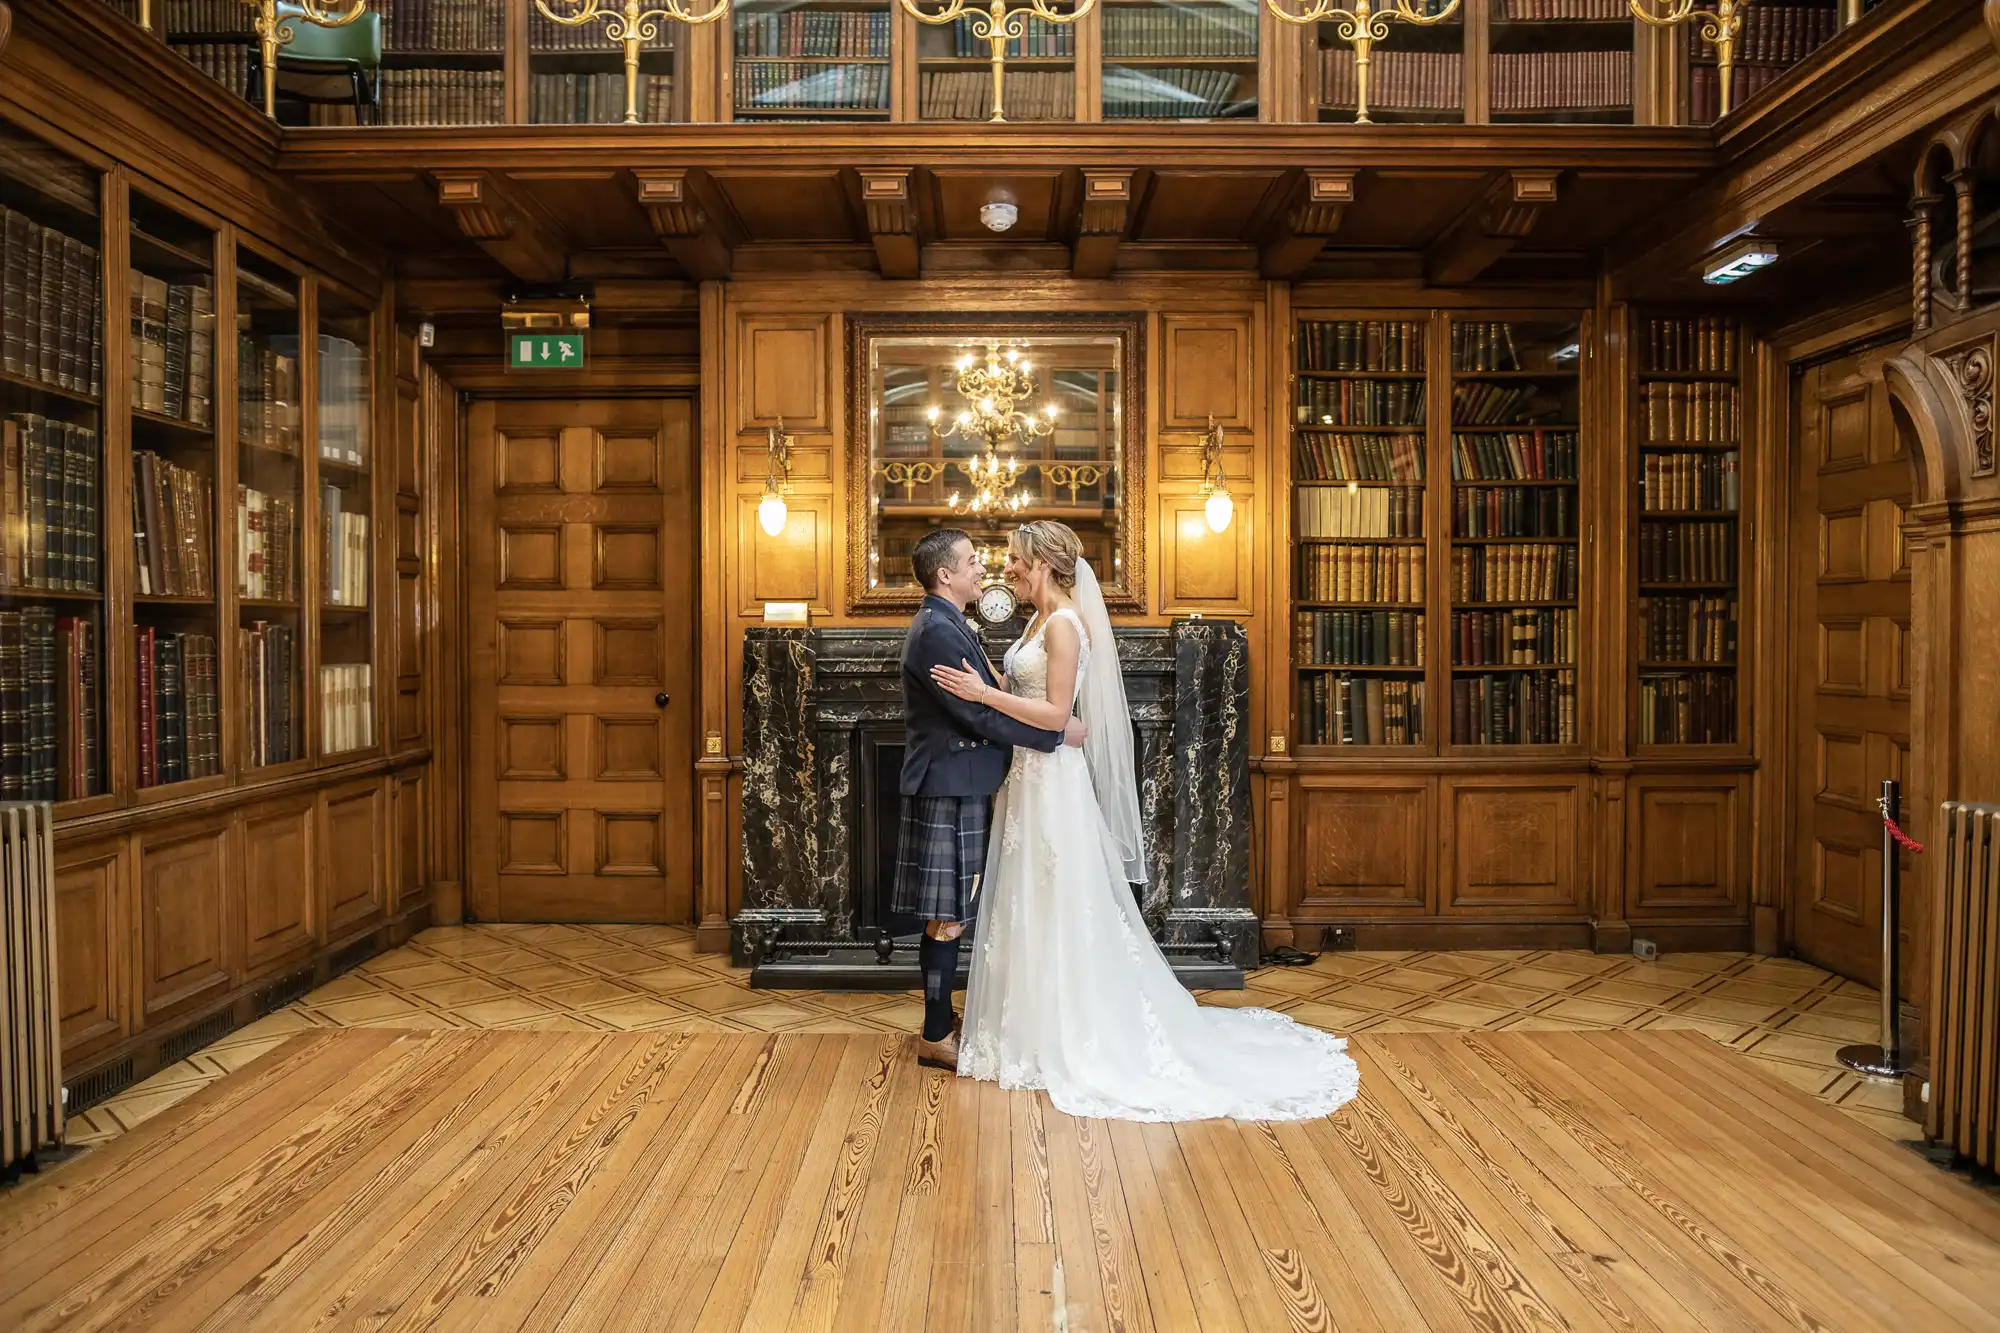 A bride and groom, dressed in a white wedding gown and a kilt, share a kiss in a grand wood-paneled library filled with bookshelves.